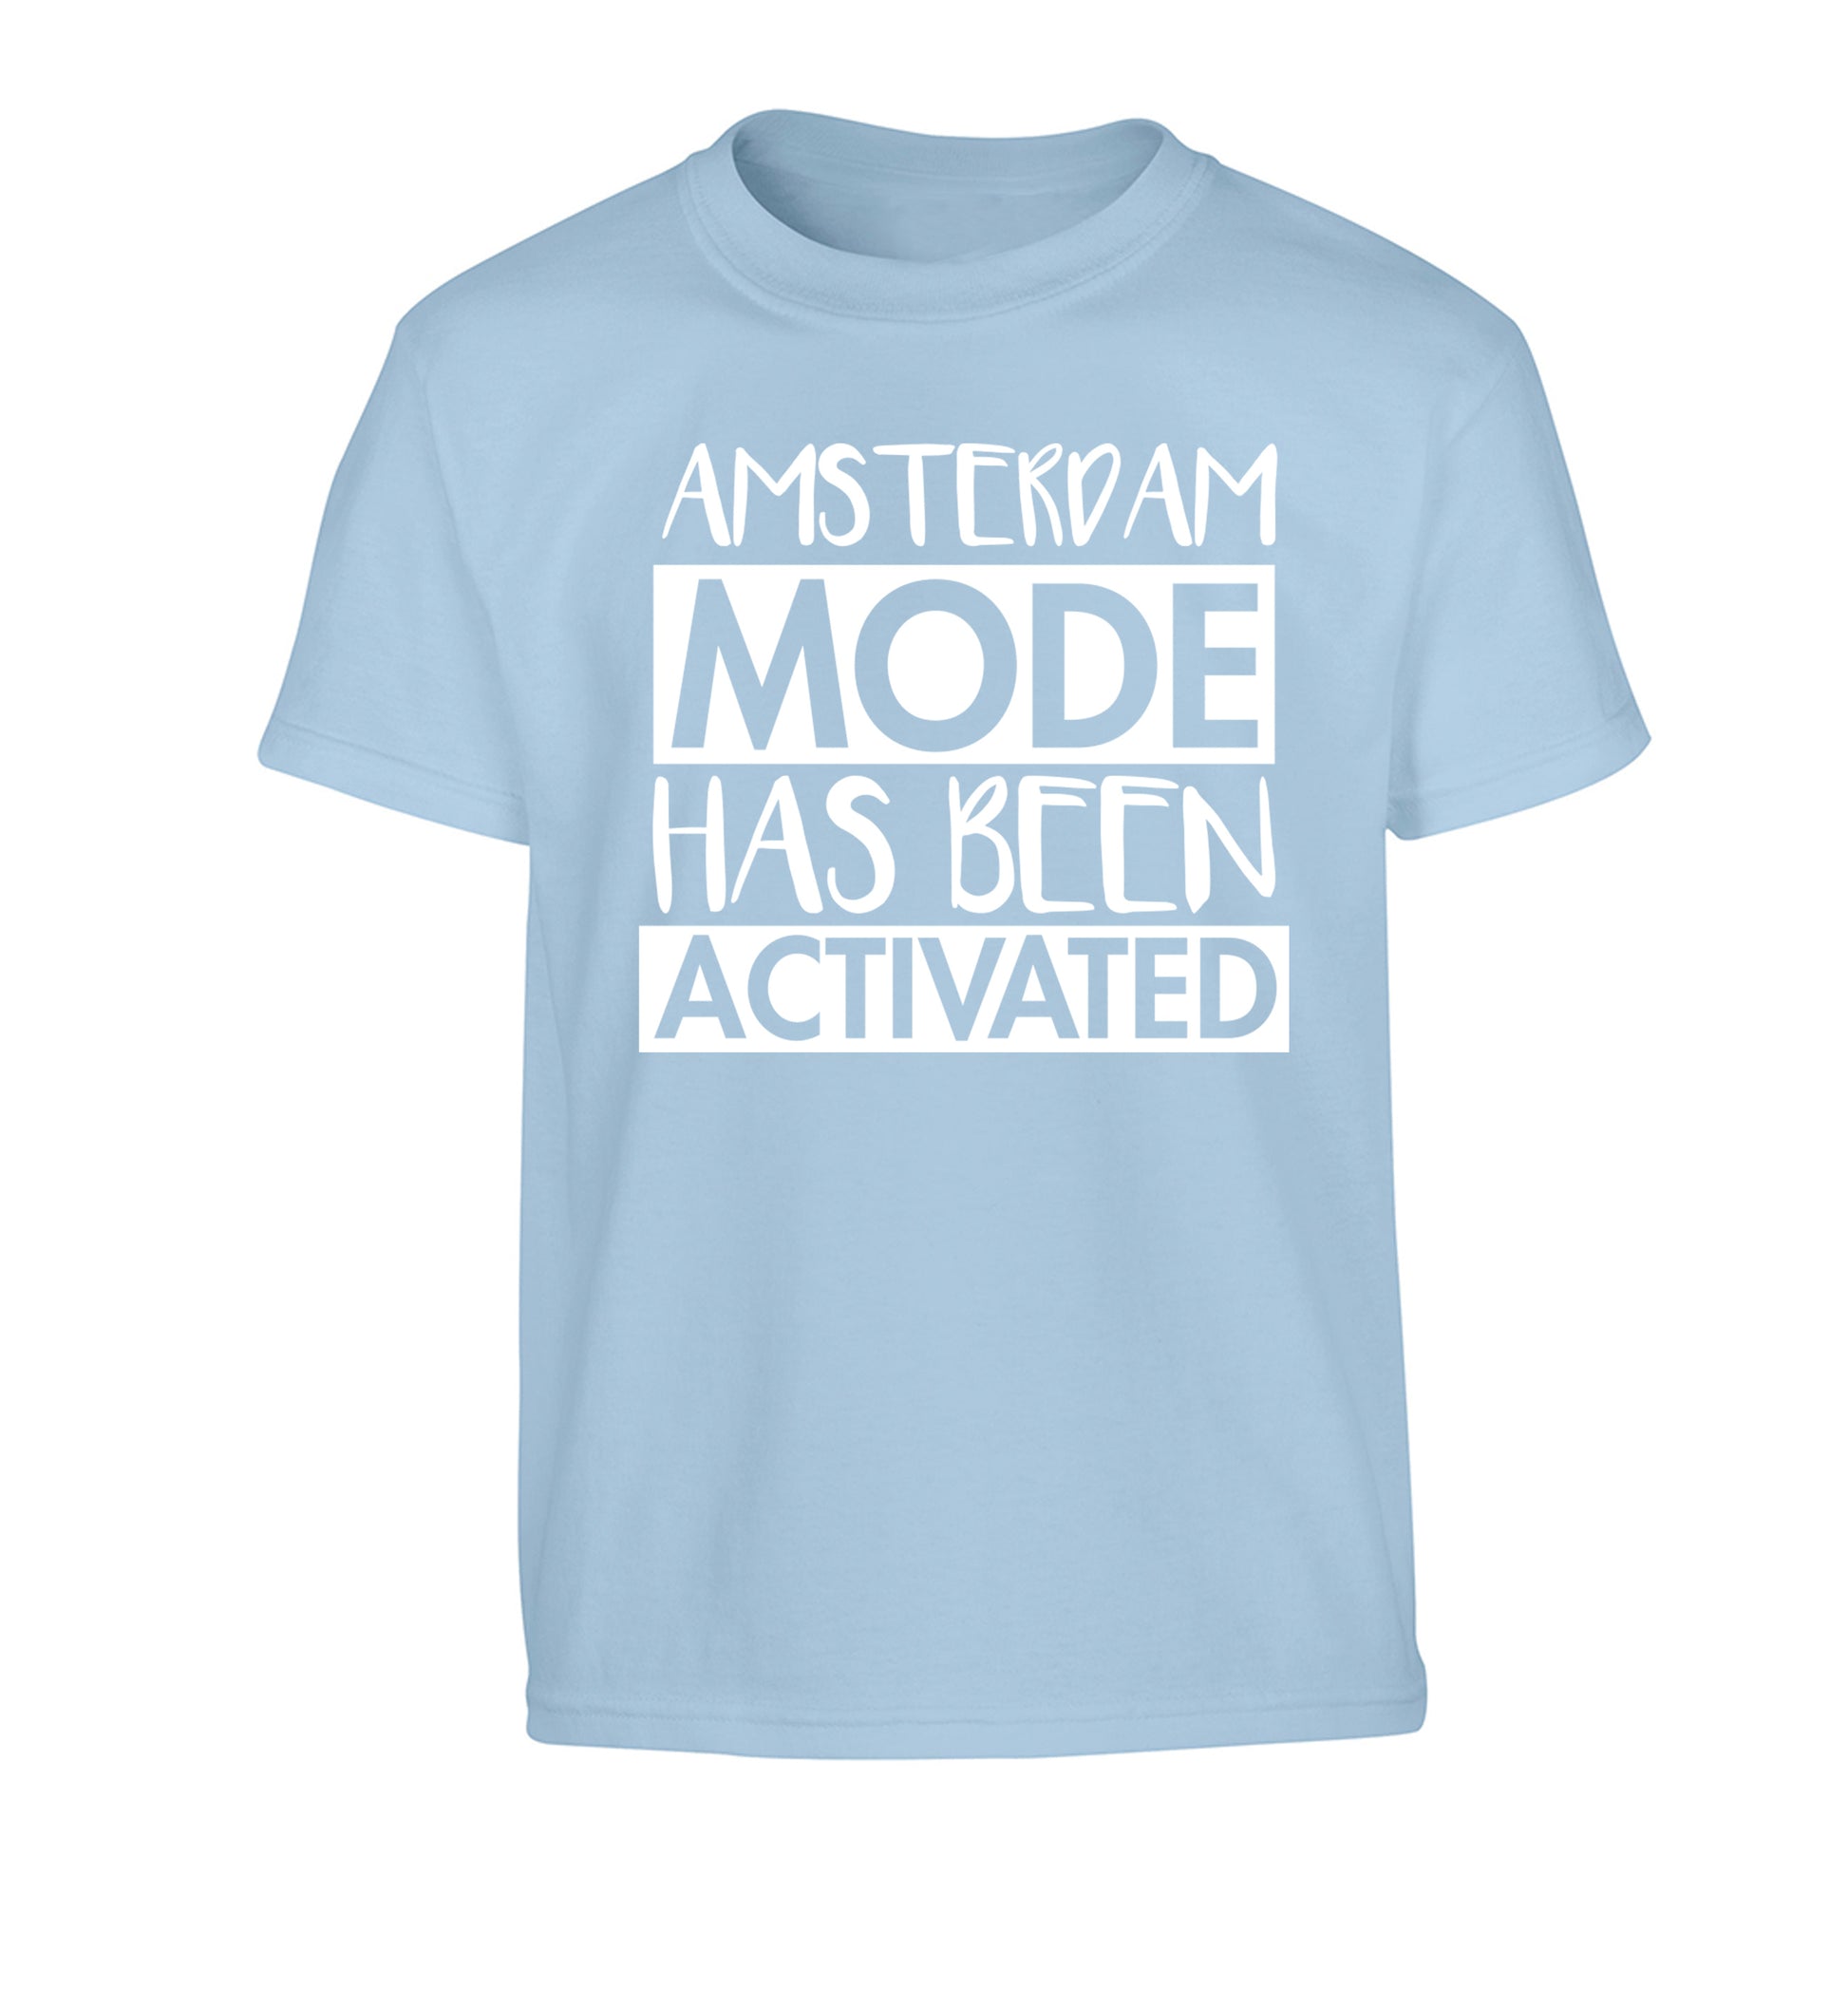 Amsterdam mode has been activated Children's light blue Tshirt 12-13 Years